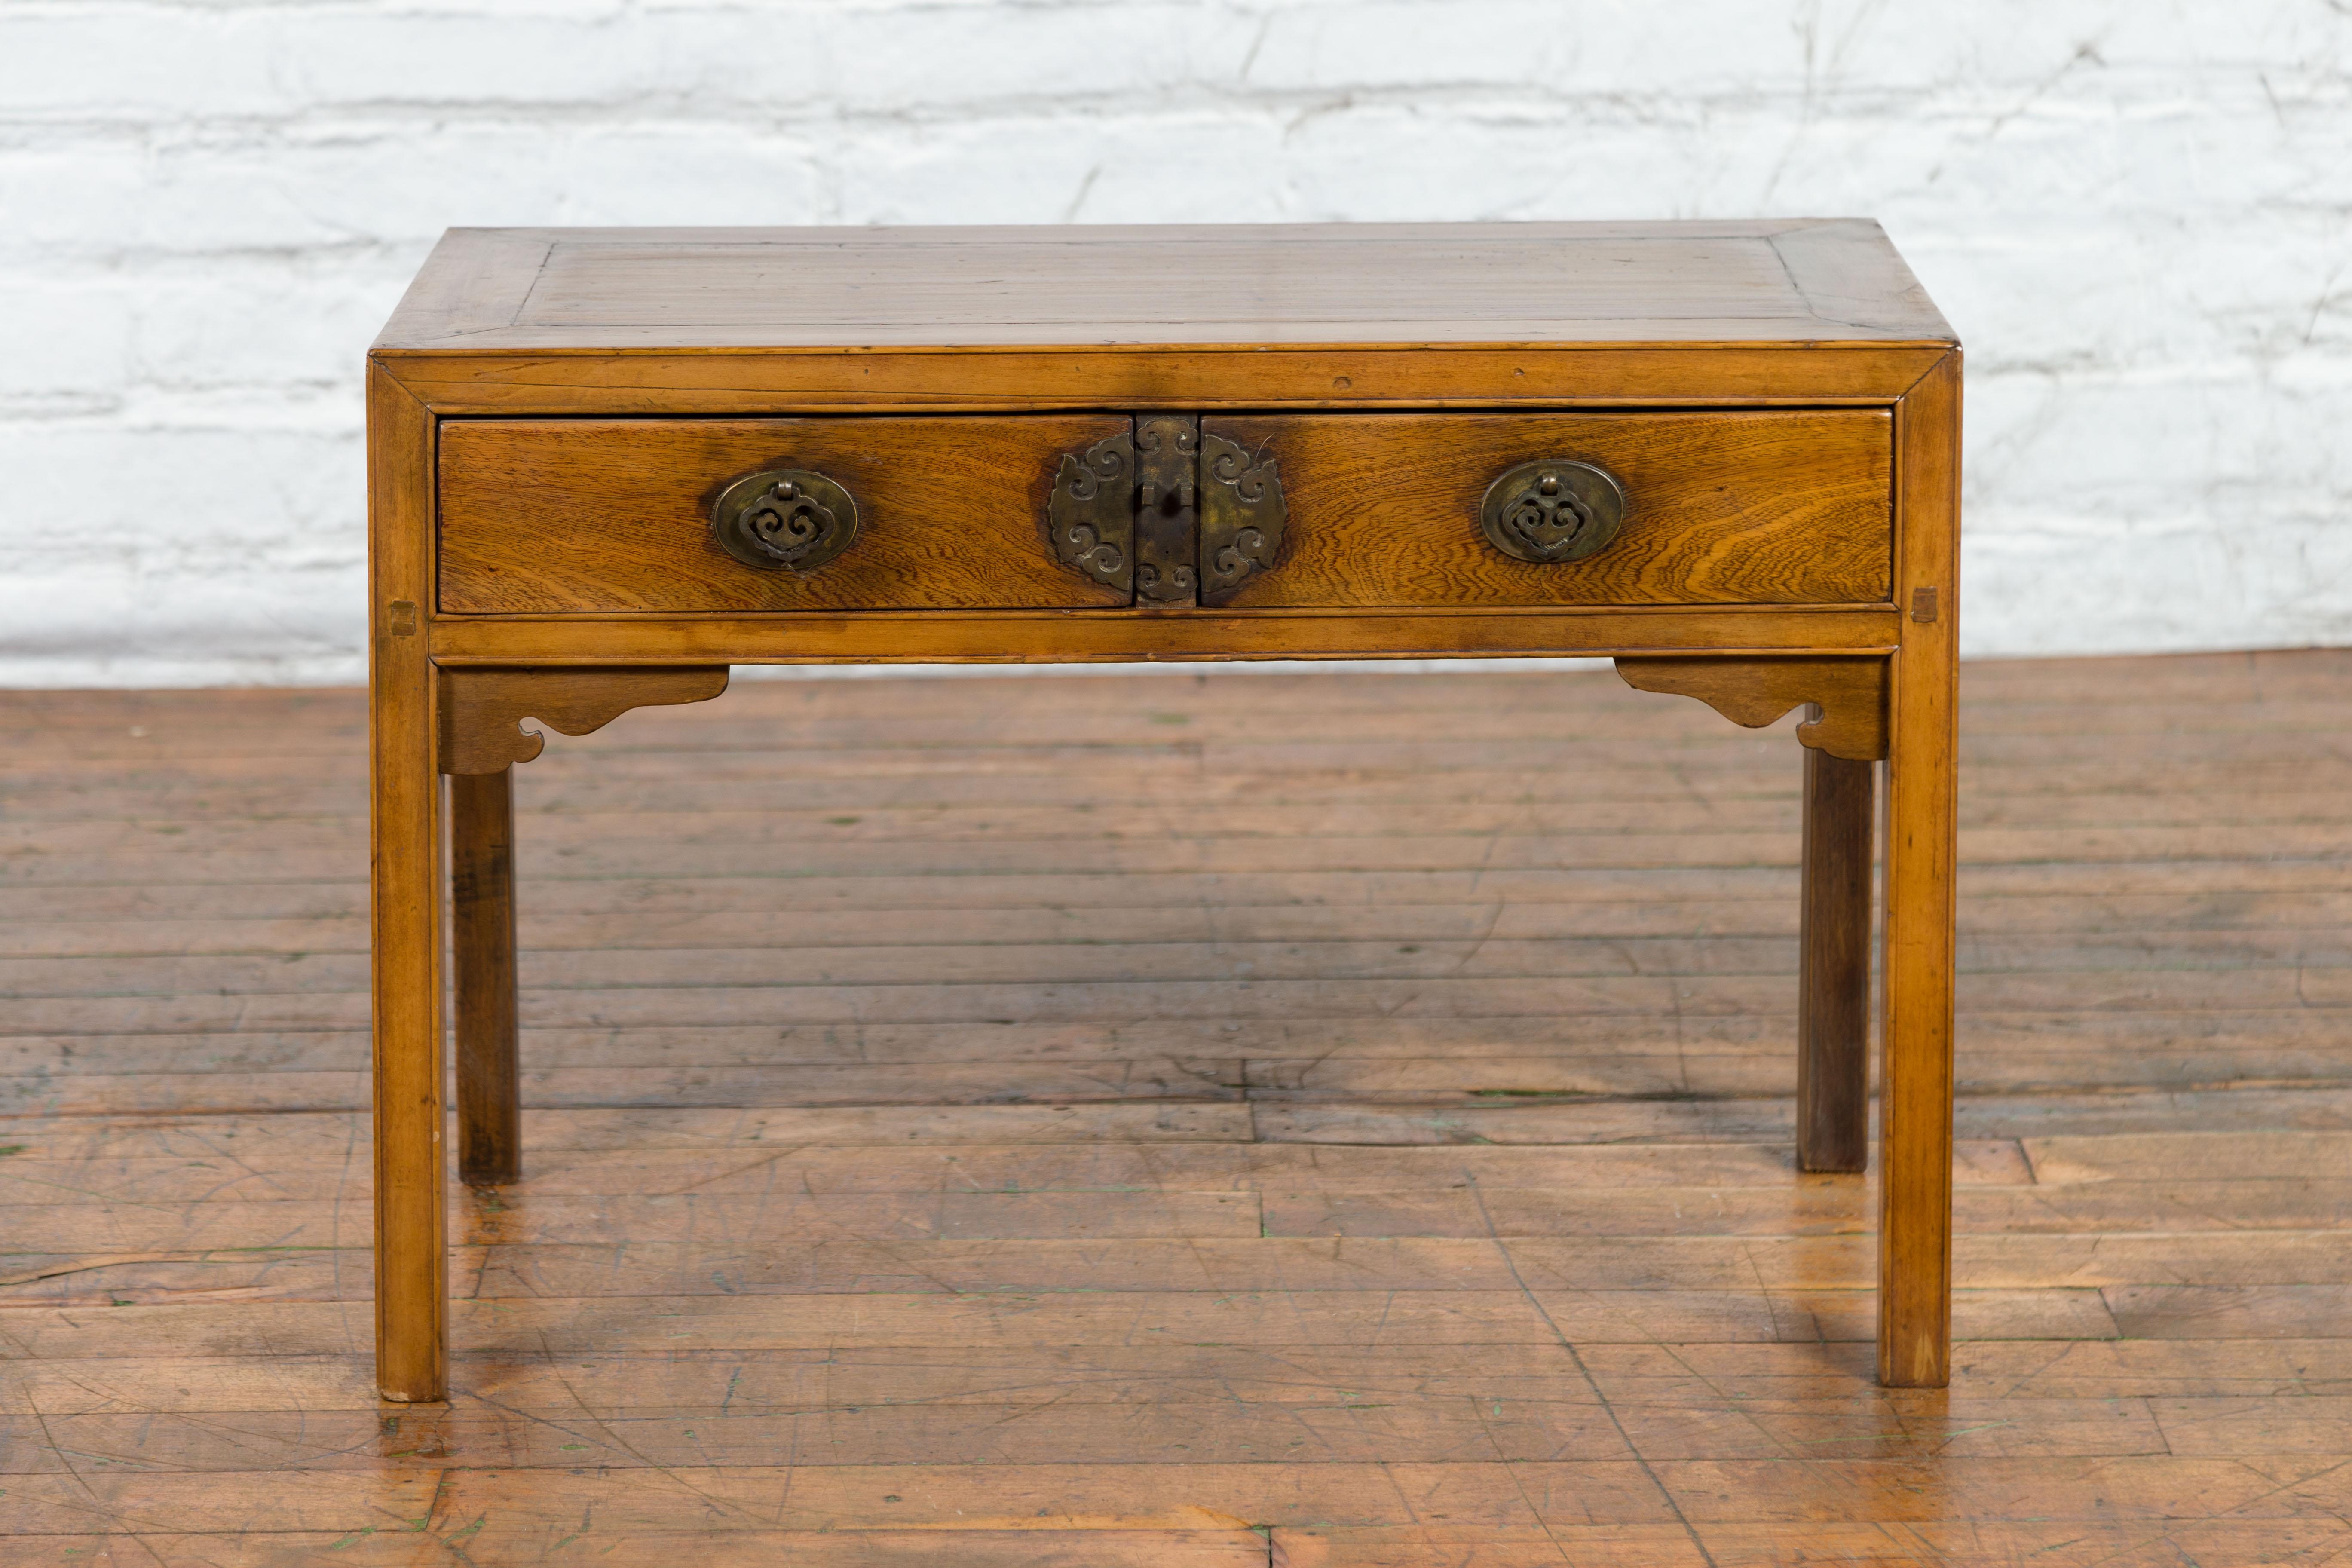 20th Century Chinese Late Qing Dynasty Elm Desk with Two Drawers and Ornate Brass Hardware For Sale